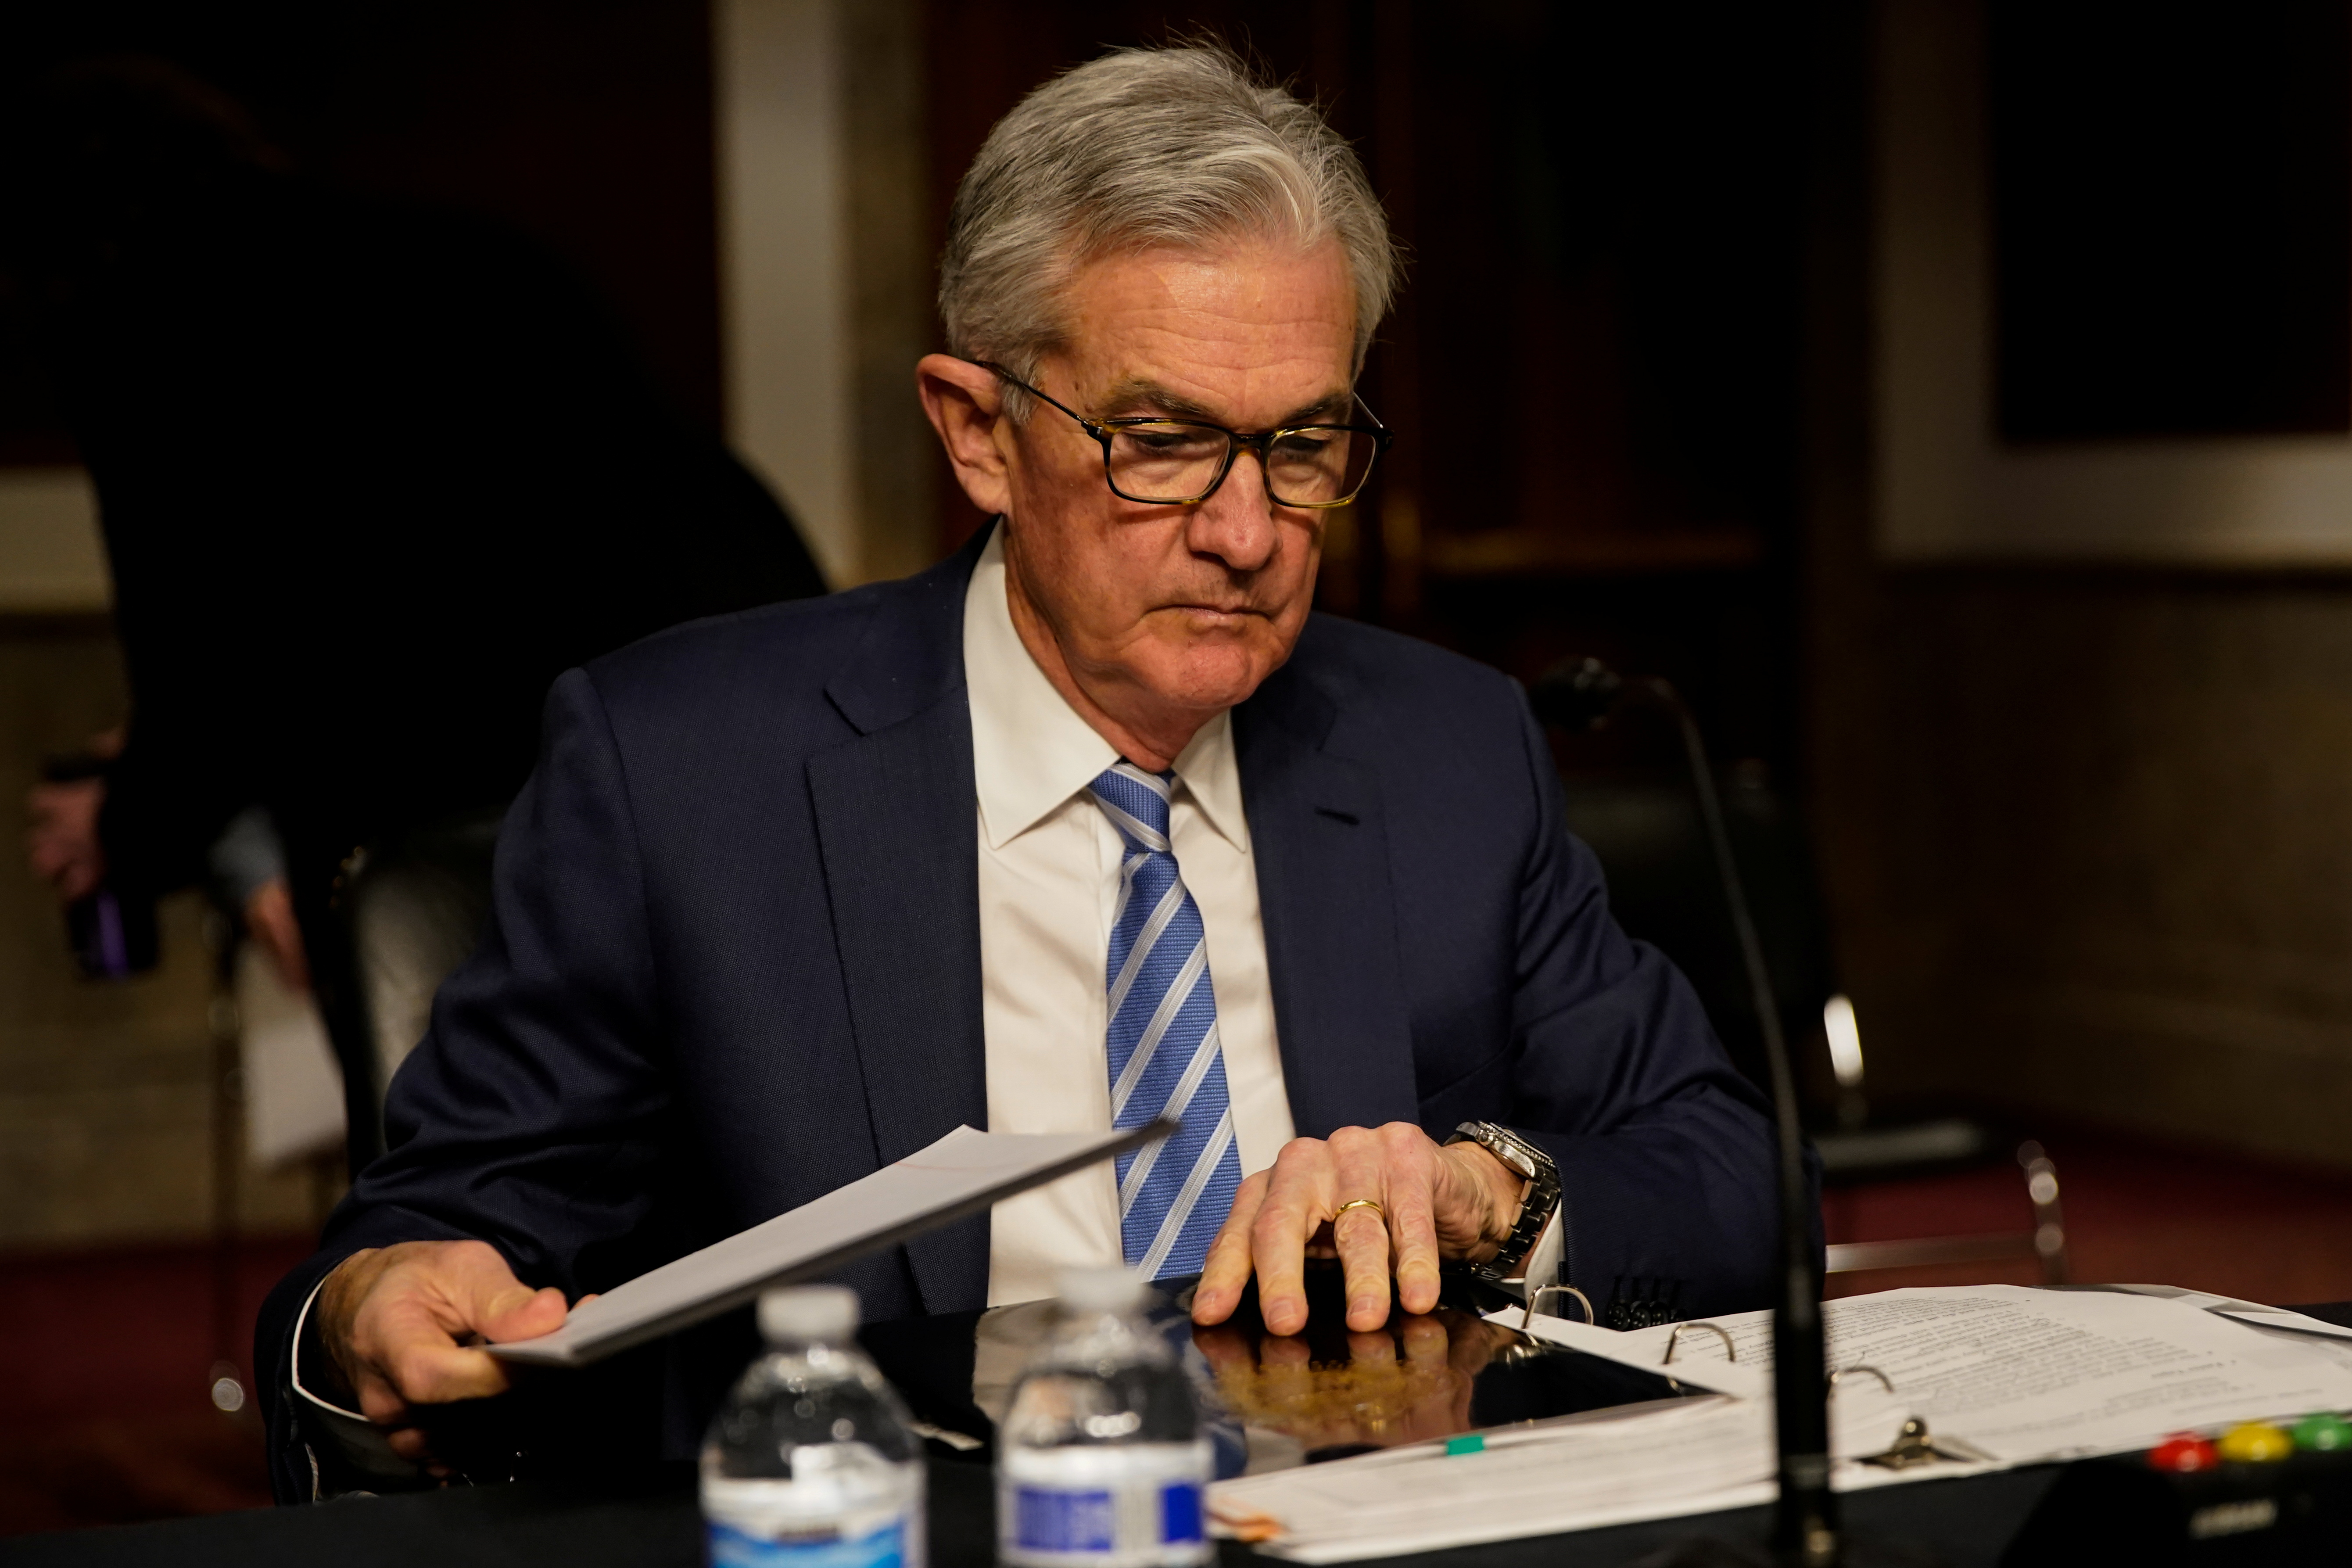 Federal Reserve Chair Jerome Powell prepares to testify before a Senate Banking Committee hybrid hearing on oversight of the Treasury Department and the Federal Reserve on Capitol Hill in Washington, U.S., November 30, 2021. REUTERS/Elizabeth Frantz